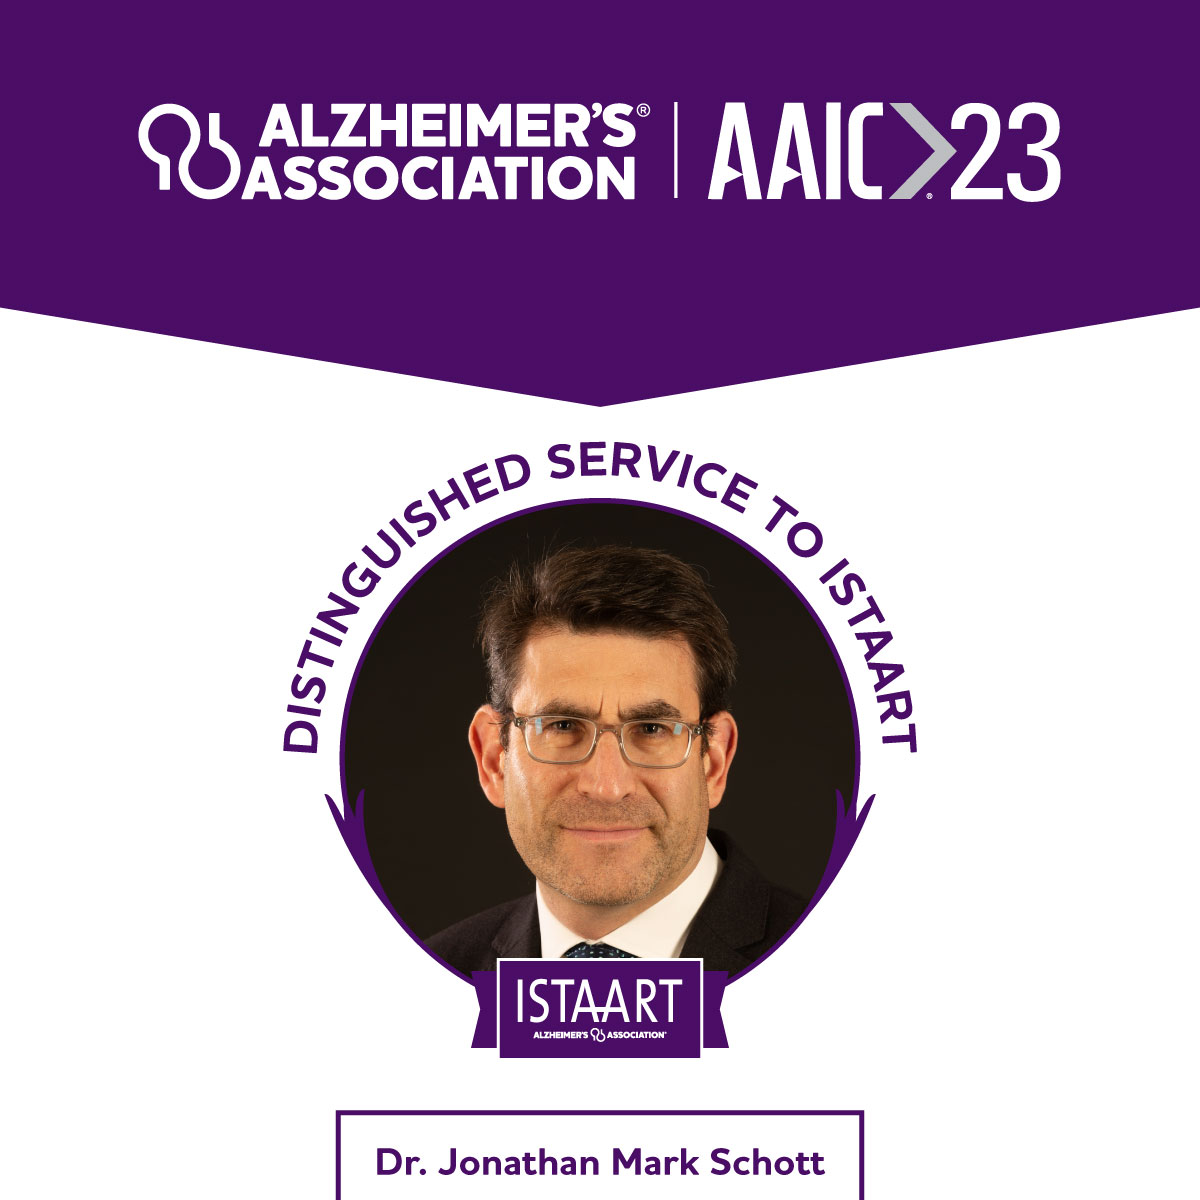 Congratulations to @jmschott, the recipient of the #AAIC23 Bill Thies Award for Distinguished Service to @ISTAART. This award recognizes a member who has provided outstanding service to the ISTAART community.